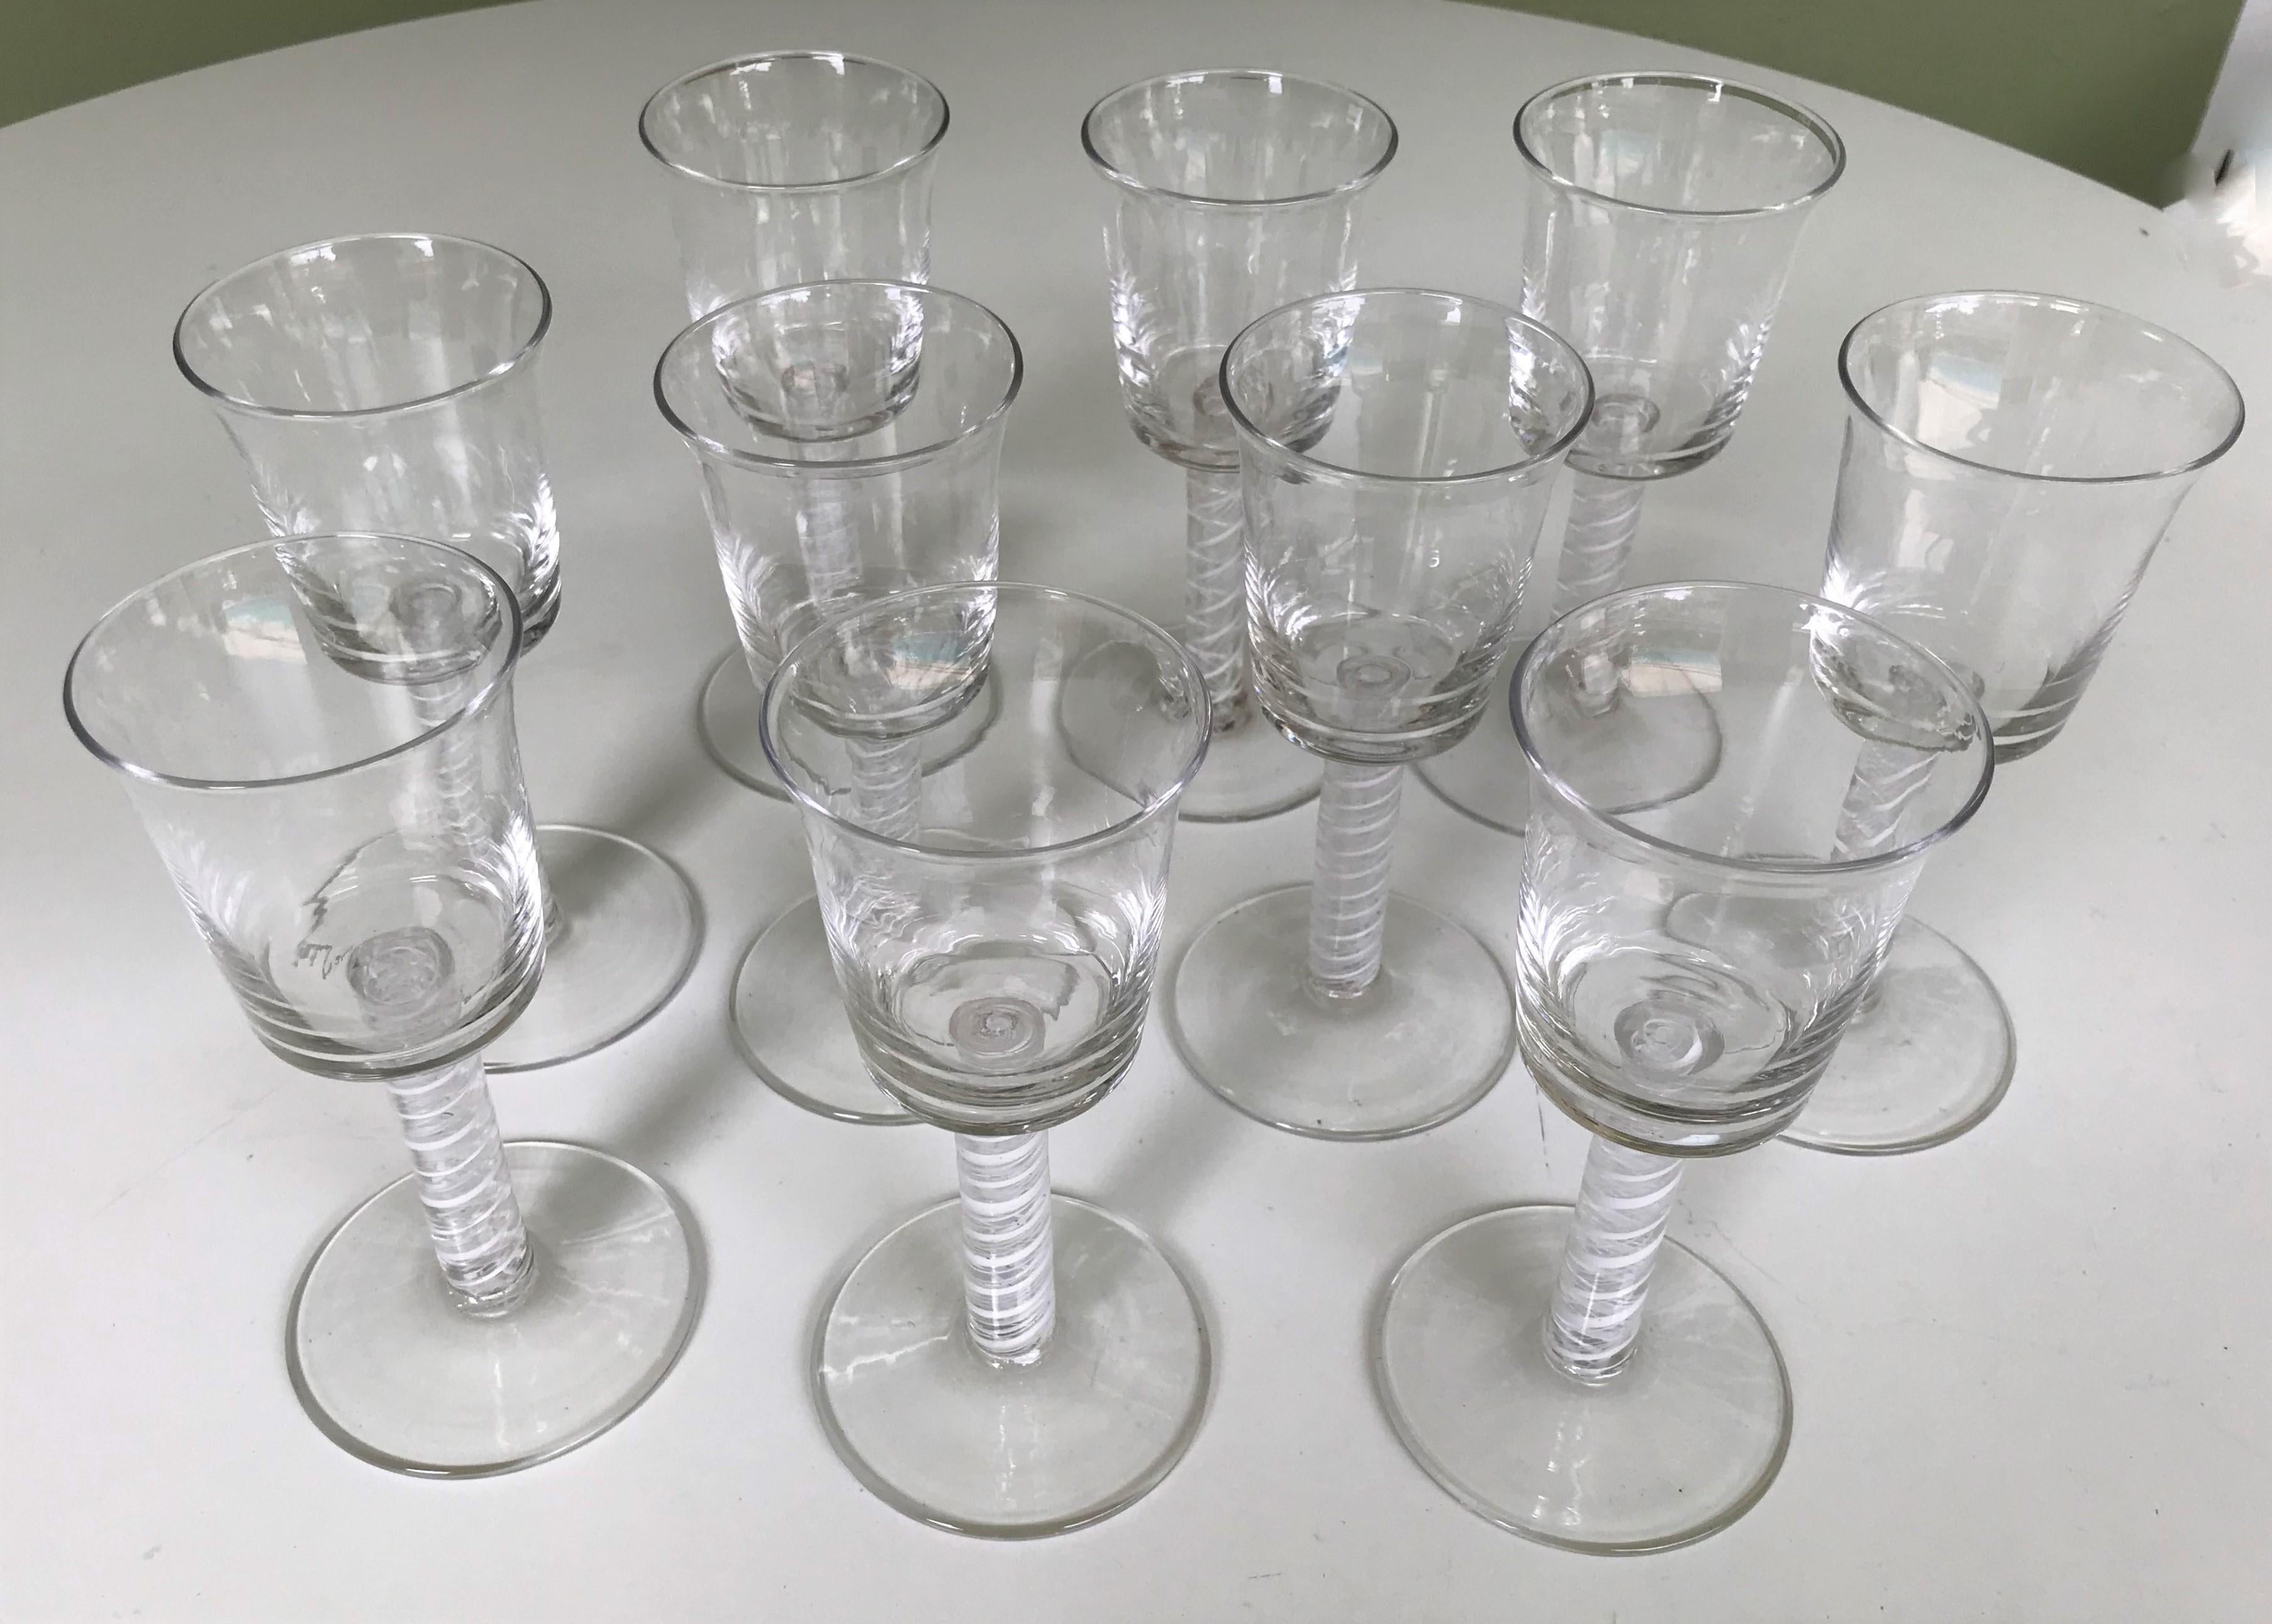 A set of ten goblets with exquisite white double twist Latticino stems. The beauty of the double spiral white in the clear stems is remarkable. Often referred to as opaque twist or air twist. Each blown glass holds 5 ounces. One goblet has a